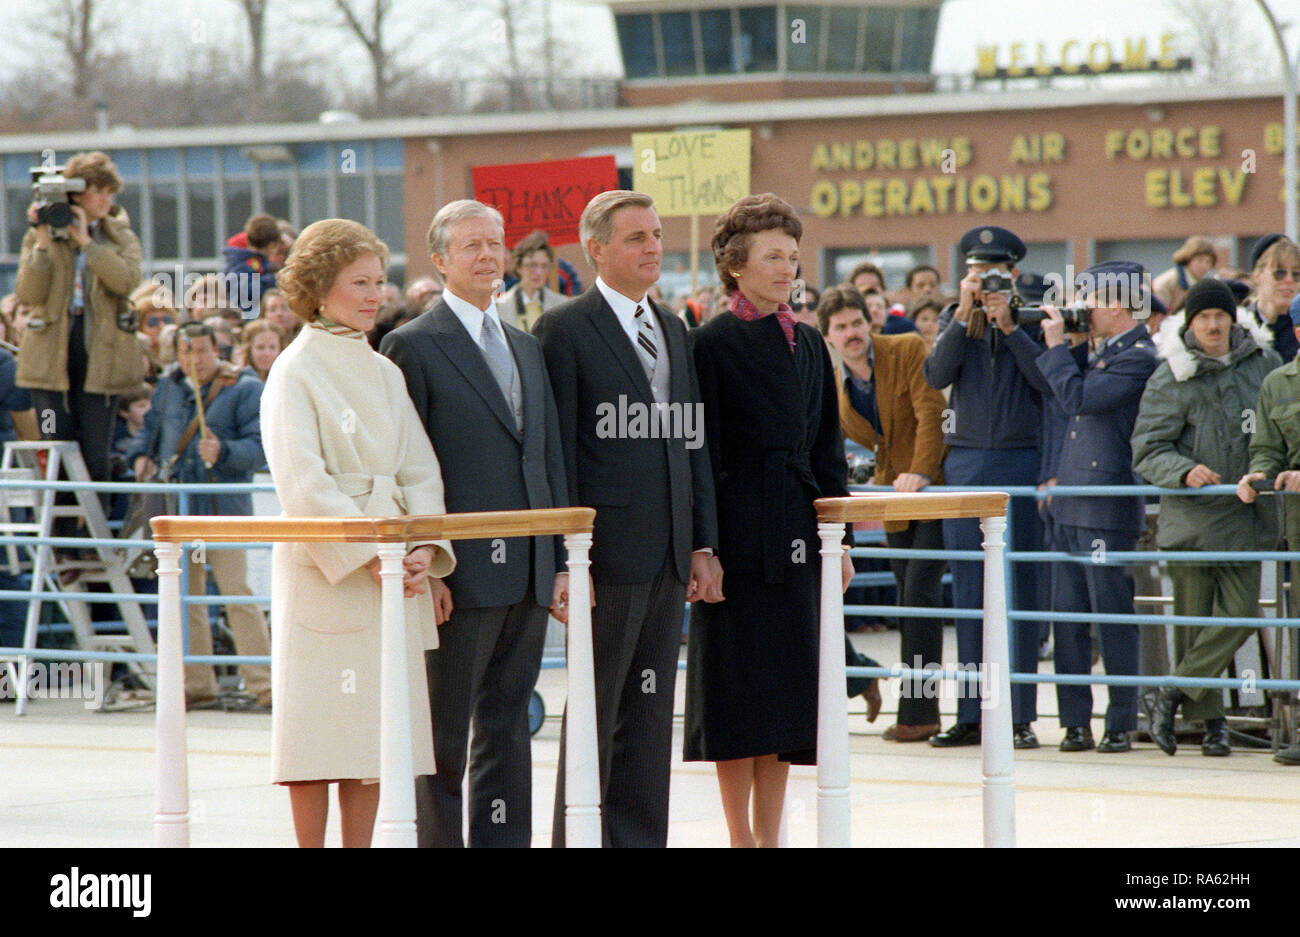 1981 - Former President Jimmy Carter and his wife, Rosalynn, along with former Vice President Walter Mondale and his wife, Joan, depart Andrews Air Force Base at the conclusion of President Ronald Reagan's inauguration ceremony. Stock Photo